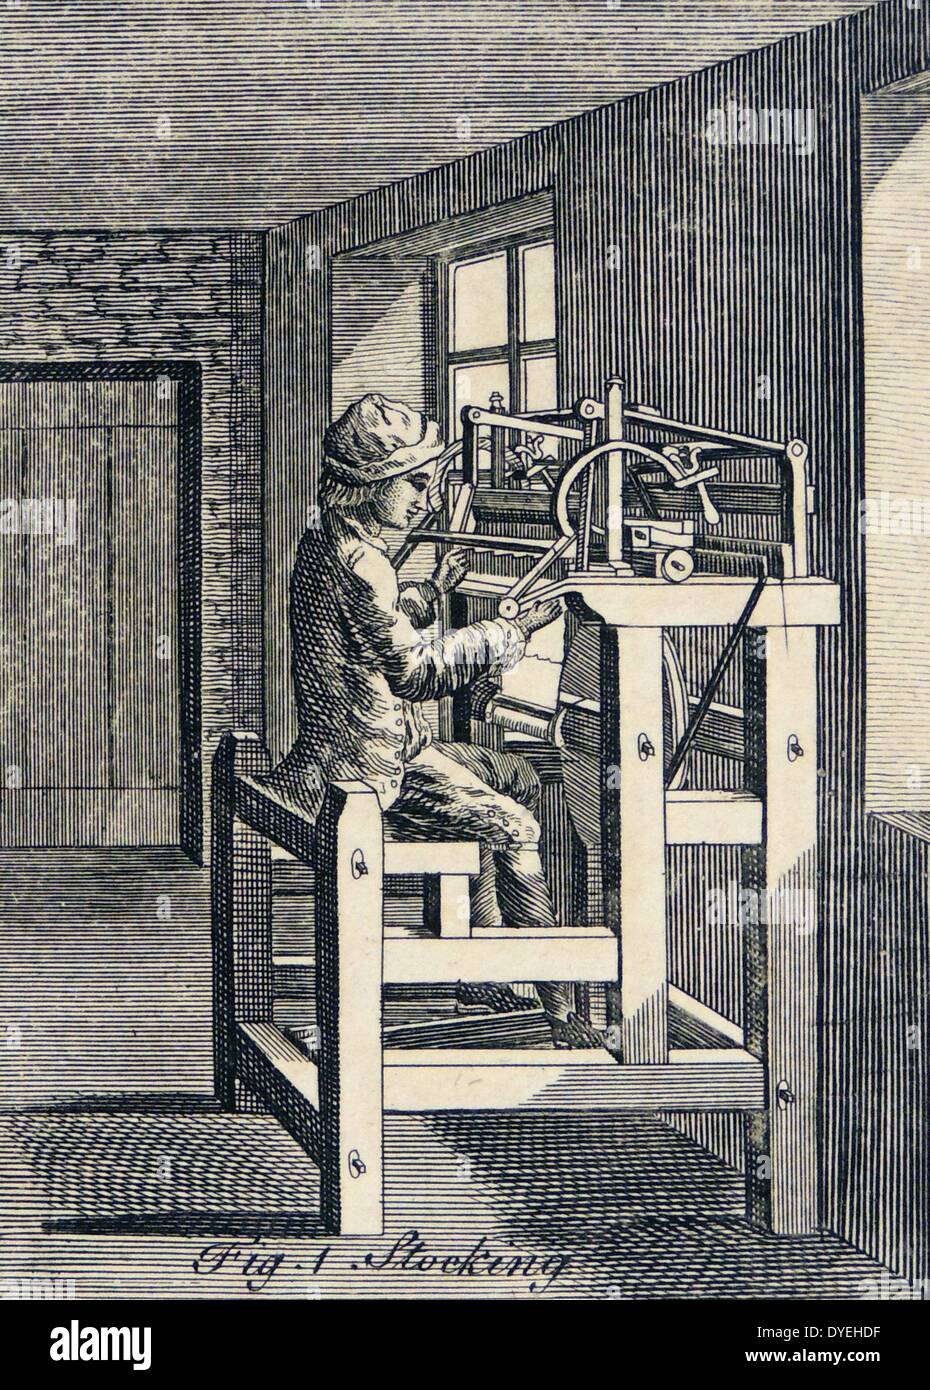 Workman seated at a stocking frame. Copperplate engraving London, 1764. Stock Photo